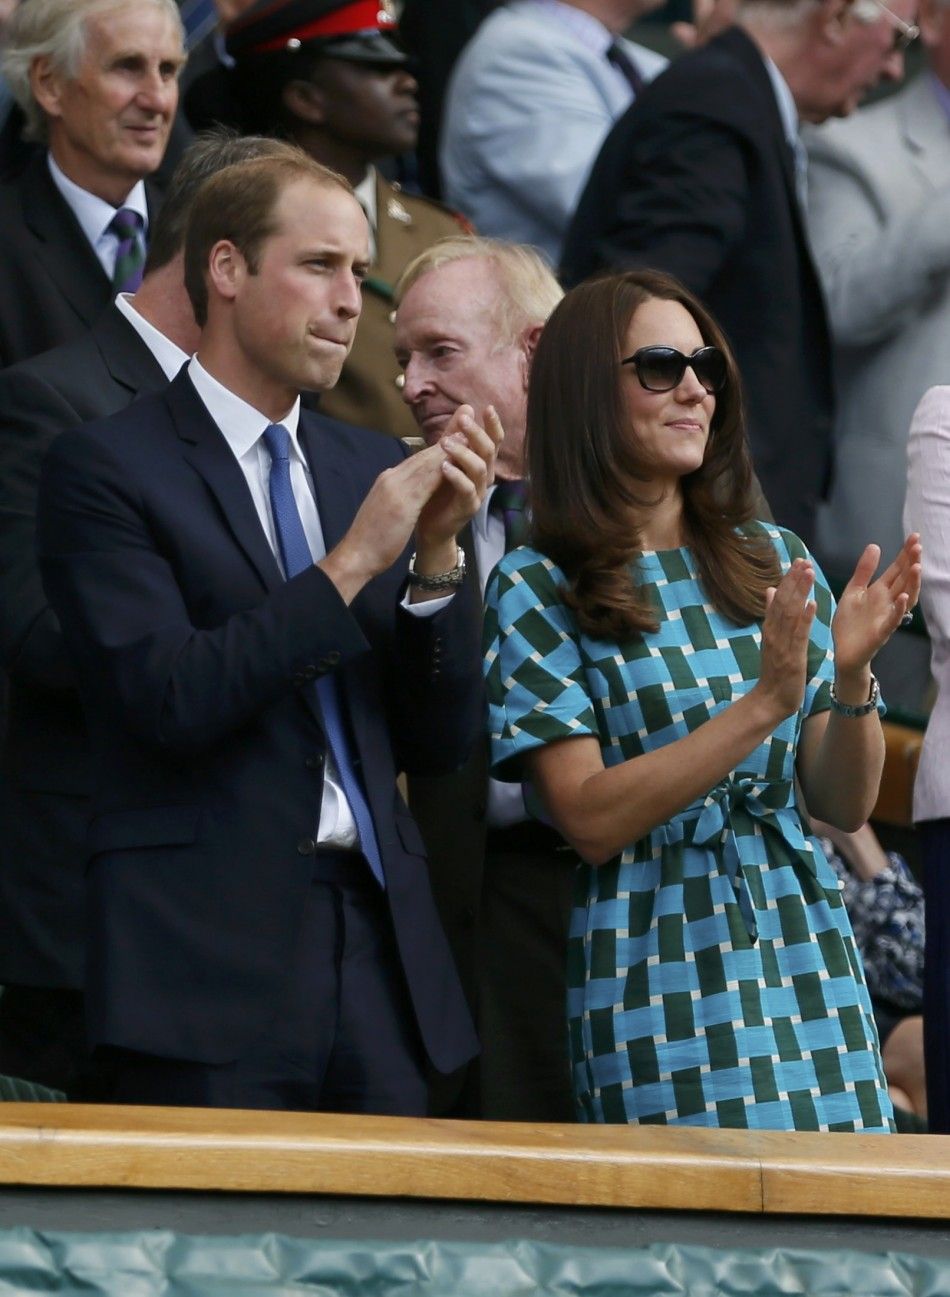 Britains Prince William and his wife Catherine, Duchess of Cambridge applaud after the fourth set of the mens singles final tennis match between Novak Djokovic of Serbia and Roger Federer of Switzerland on Centre Court at the Wimbledon Tennis Championsh